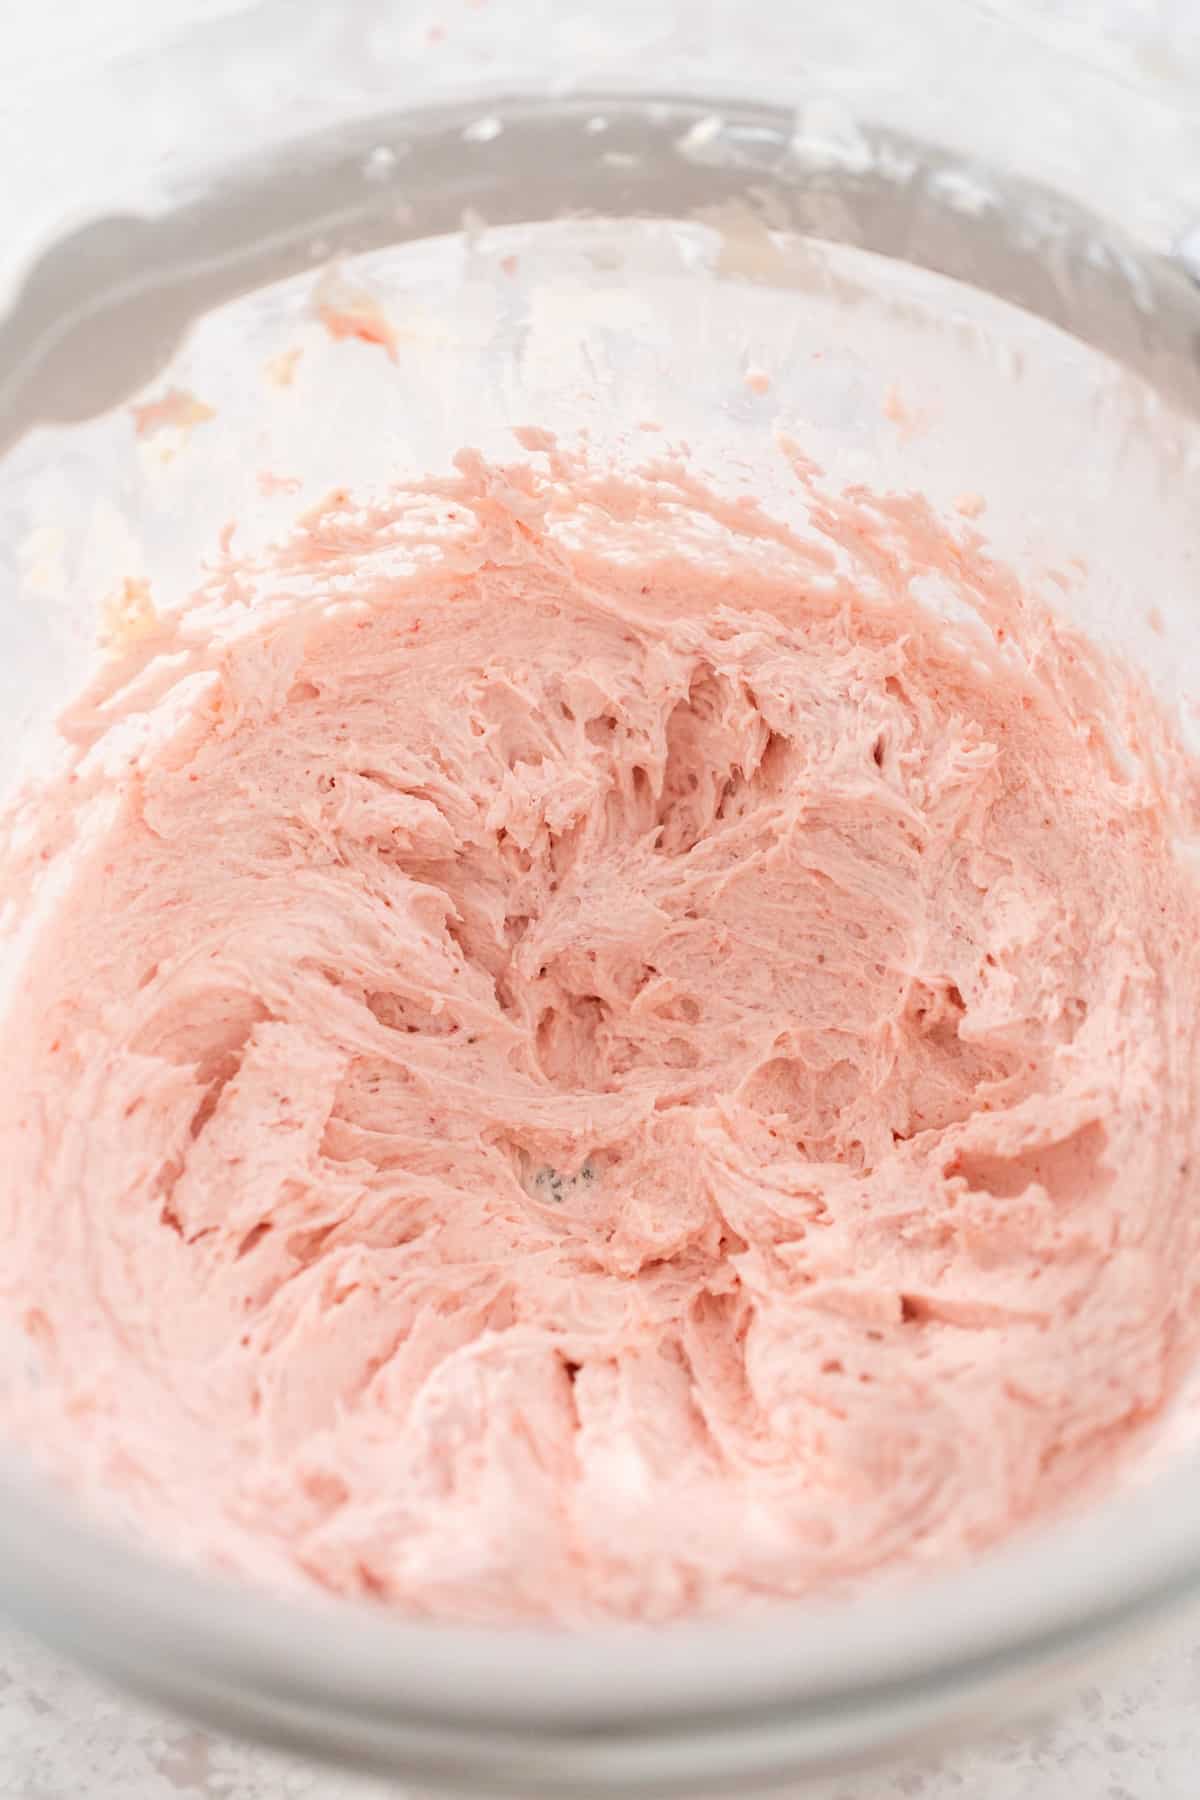 Whipped pink icing in a glass bowl.